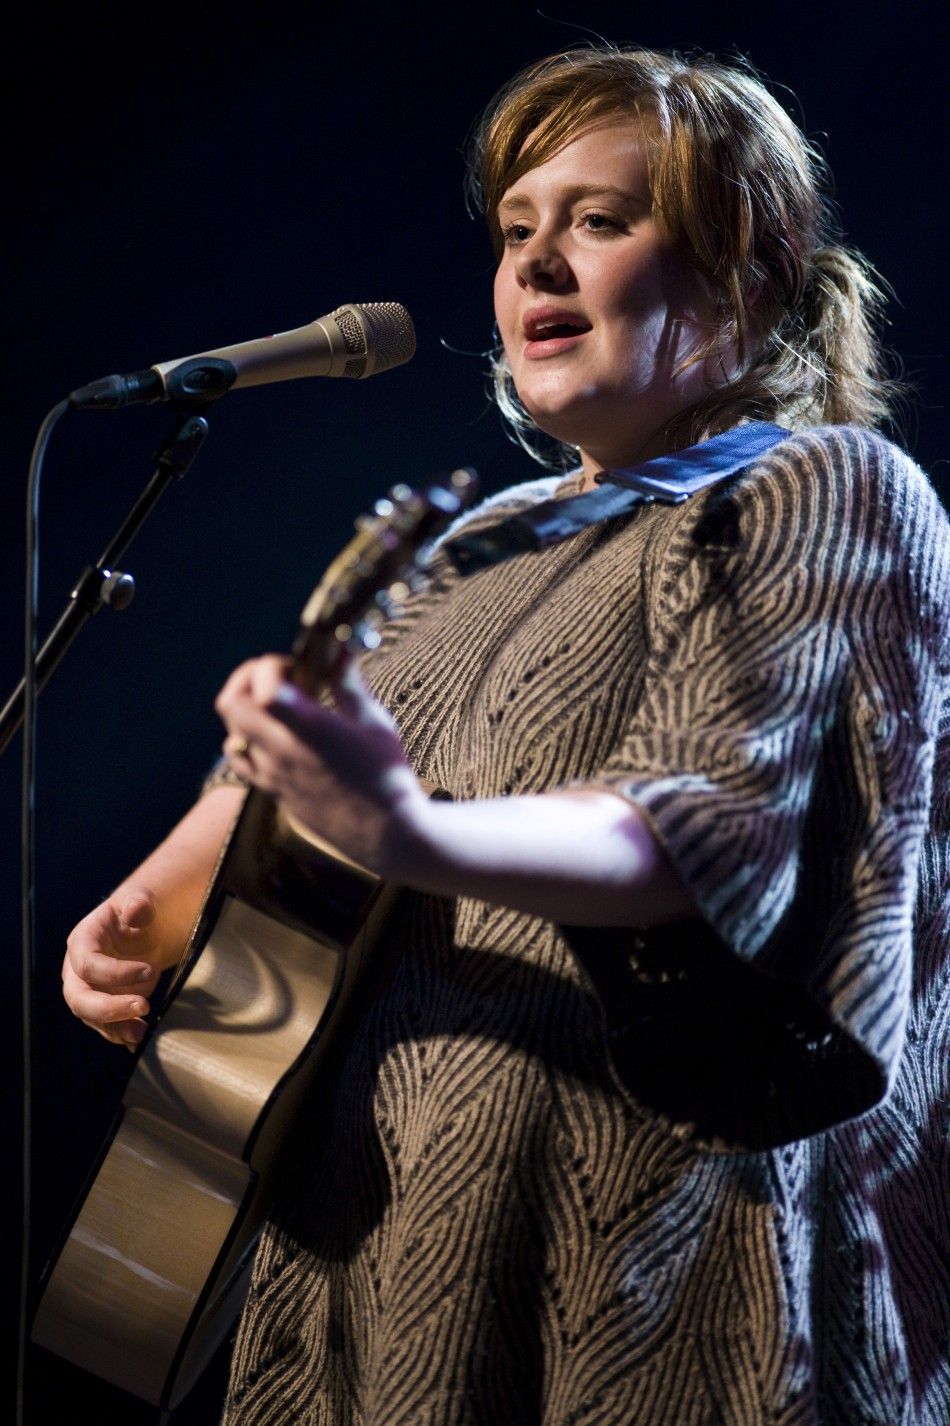 British singer Adele performs at the 42nd Montreux Jazz Festival